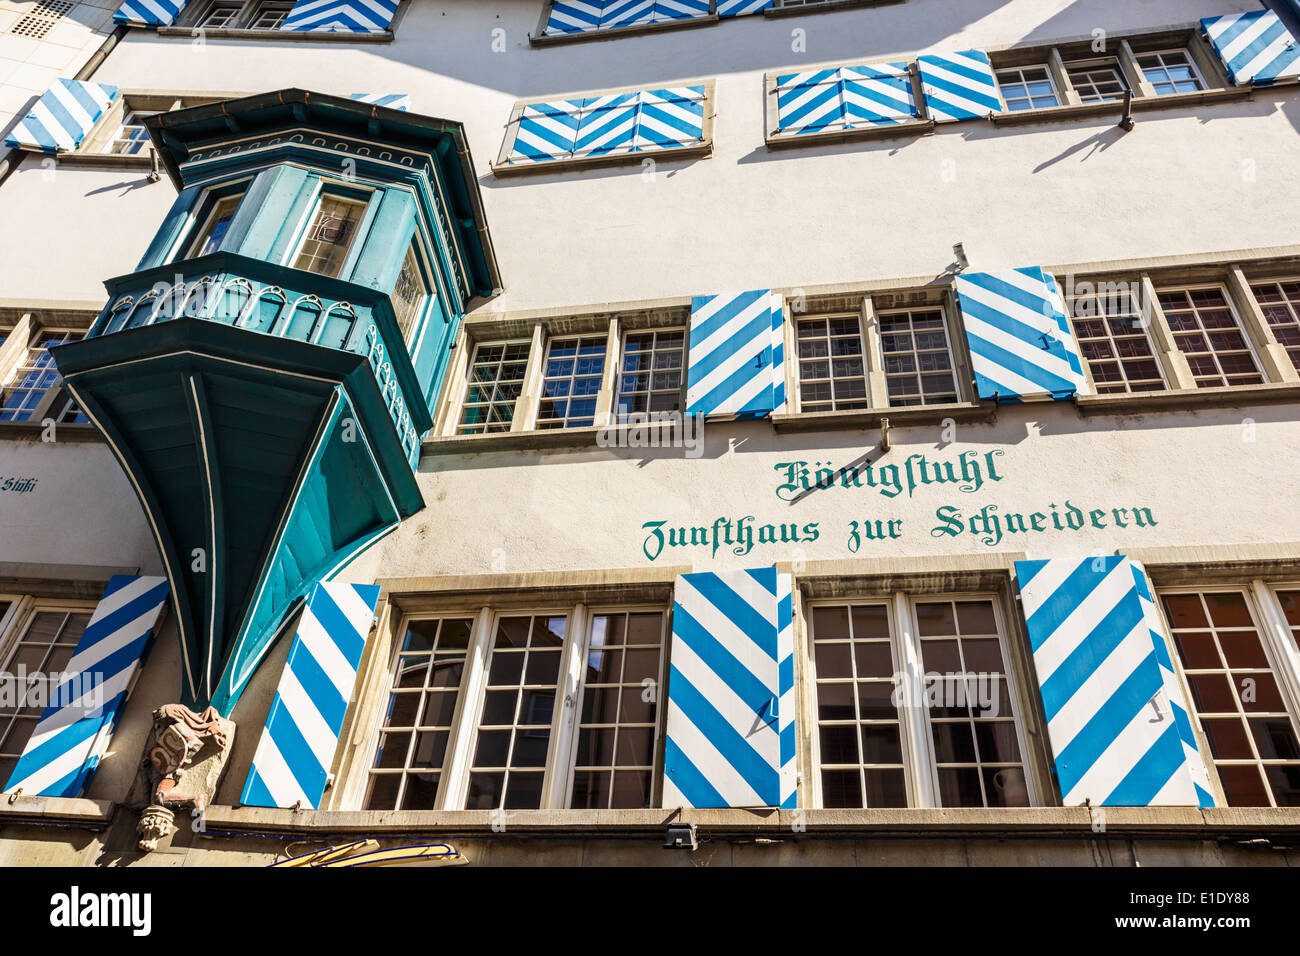 Facade of a typical house with bay window, gothic lettering, window shutters with the colors of the city, Zurich, Switzerland. Stock Photo